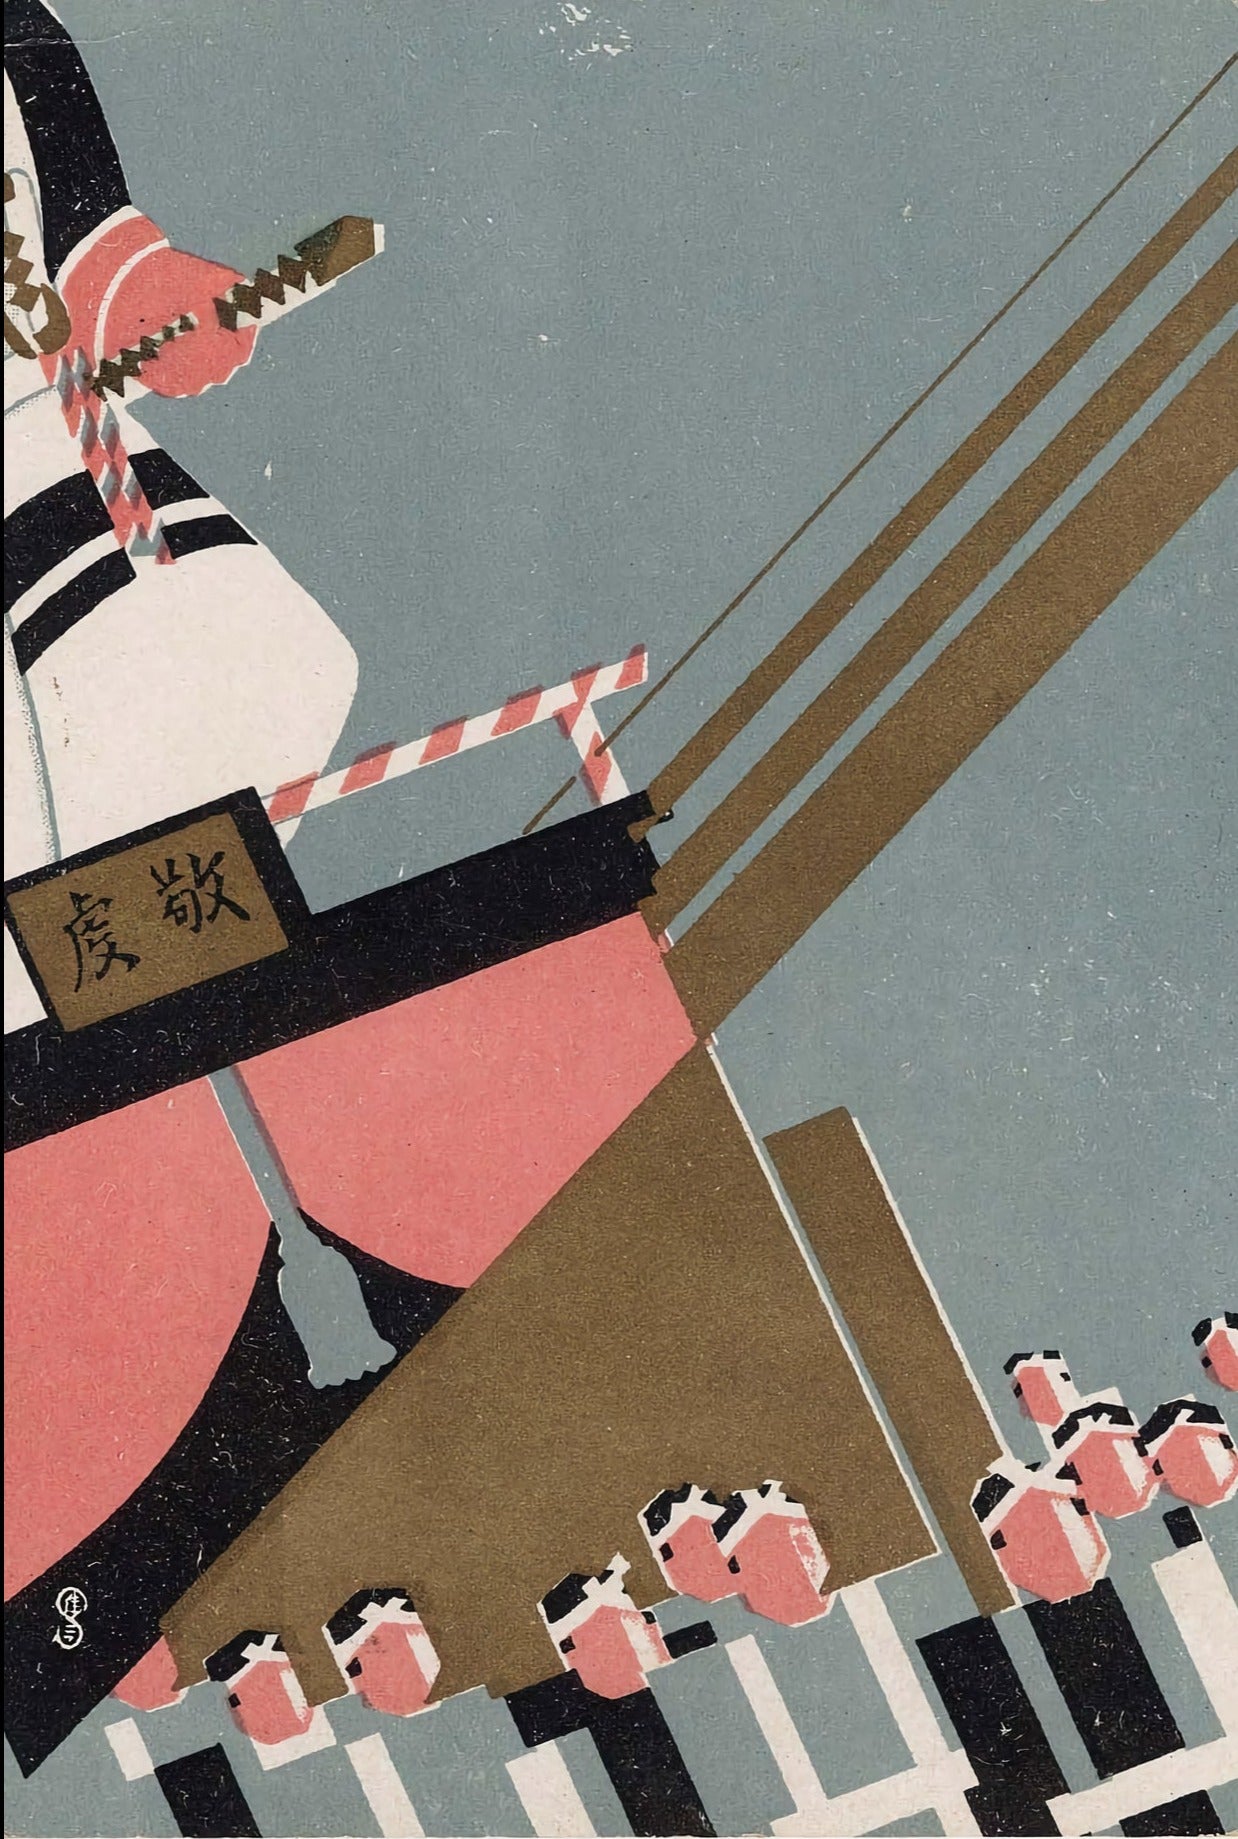 Spring Festival at the Onsen, c. 1930 - Postcard